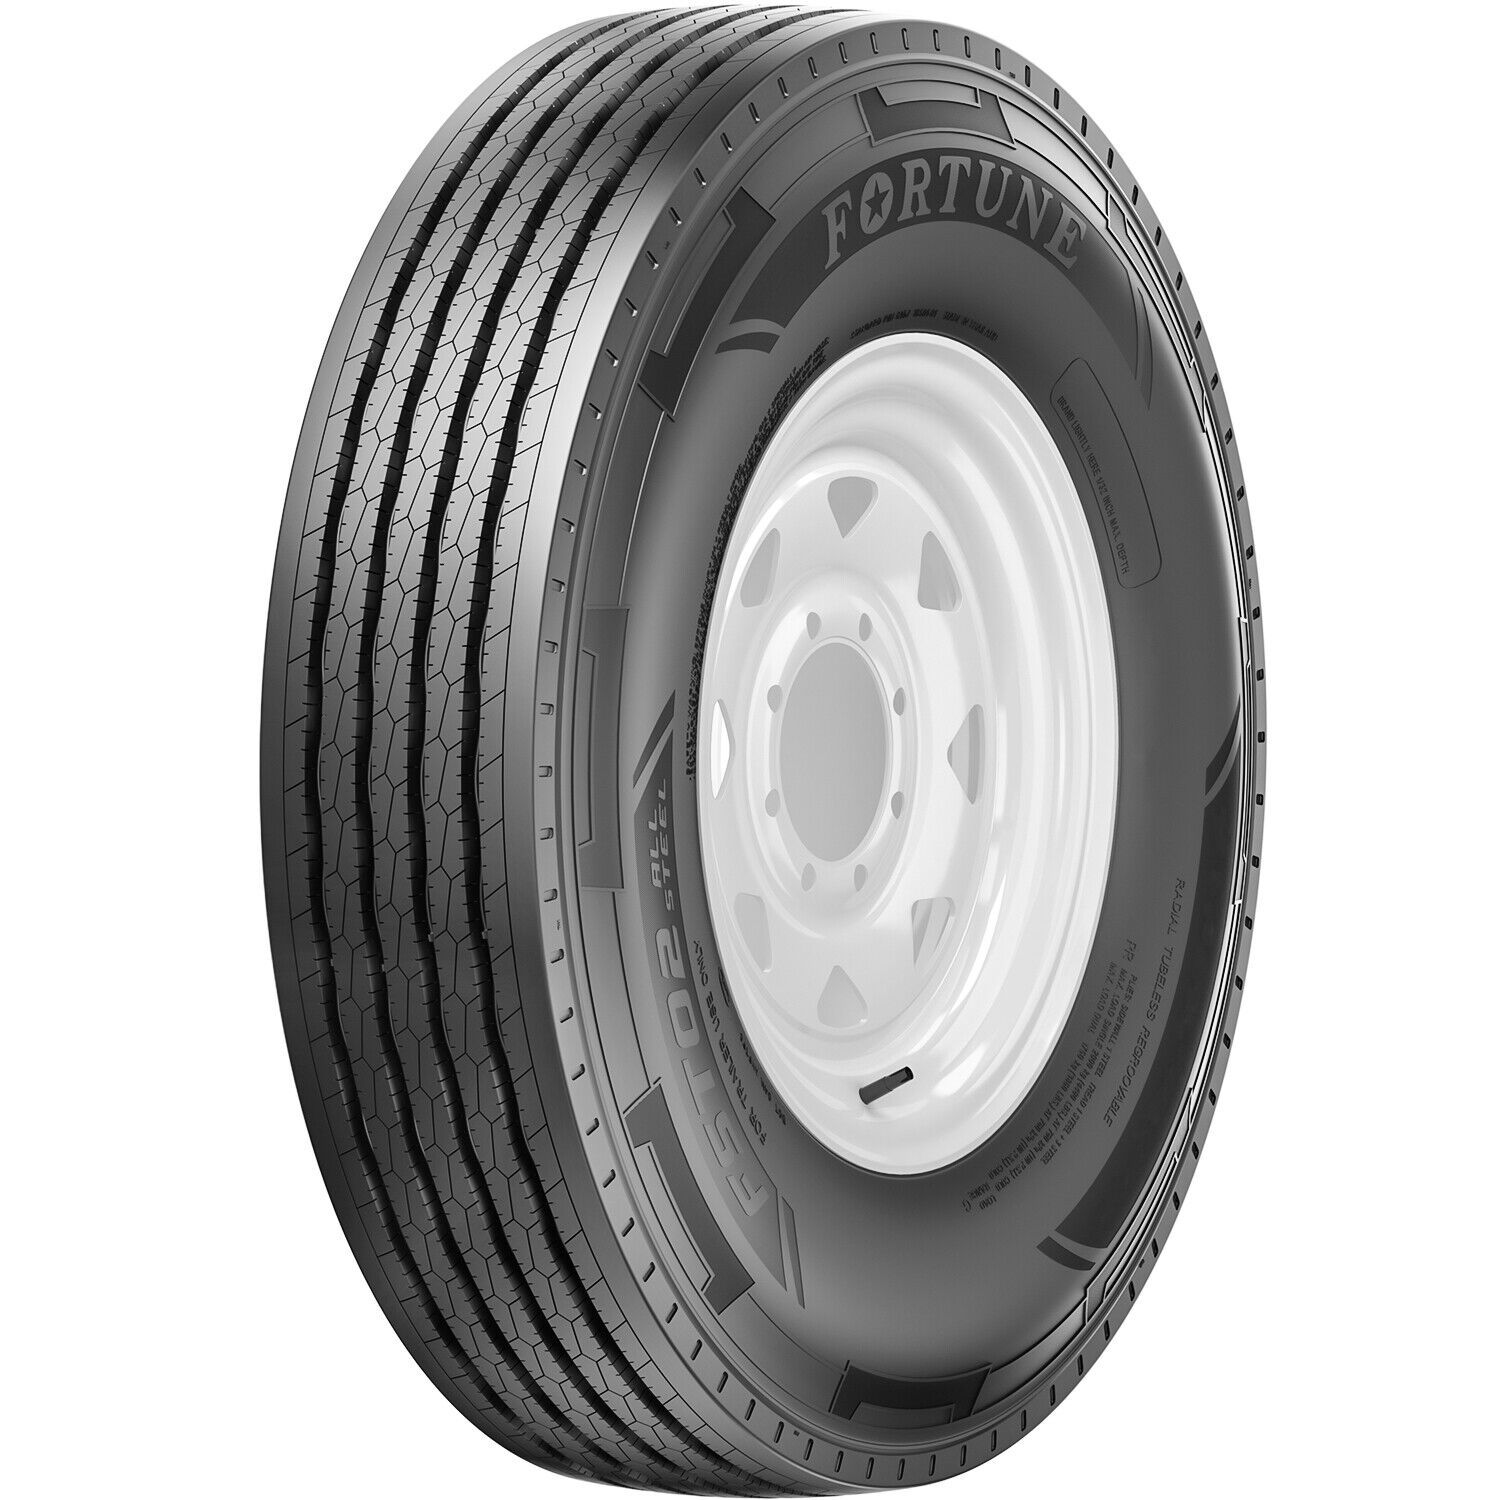 Tire Fortune FST02 All Steel ST 235/80R16 Load G 14 Ply Trailer